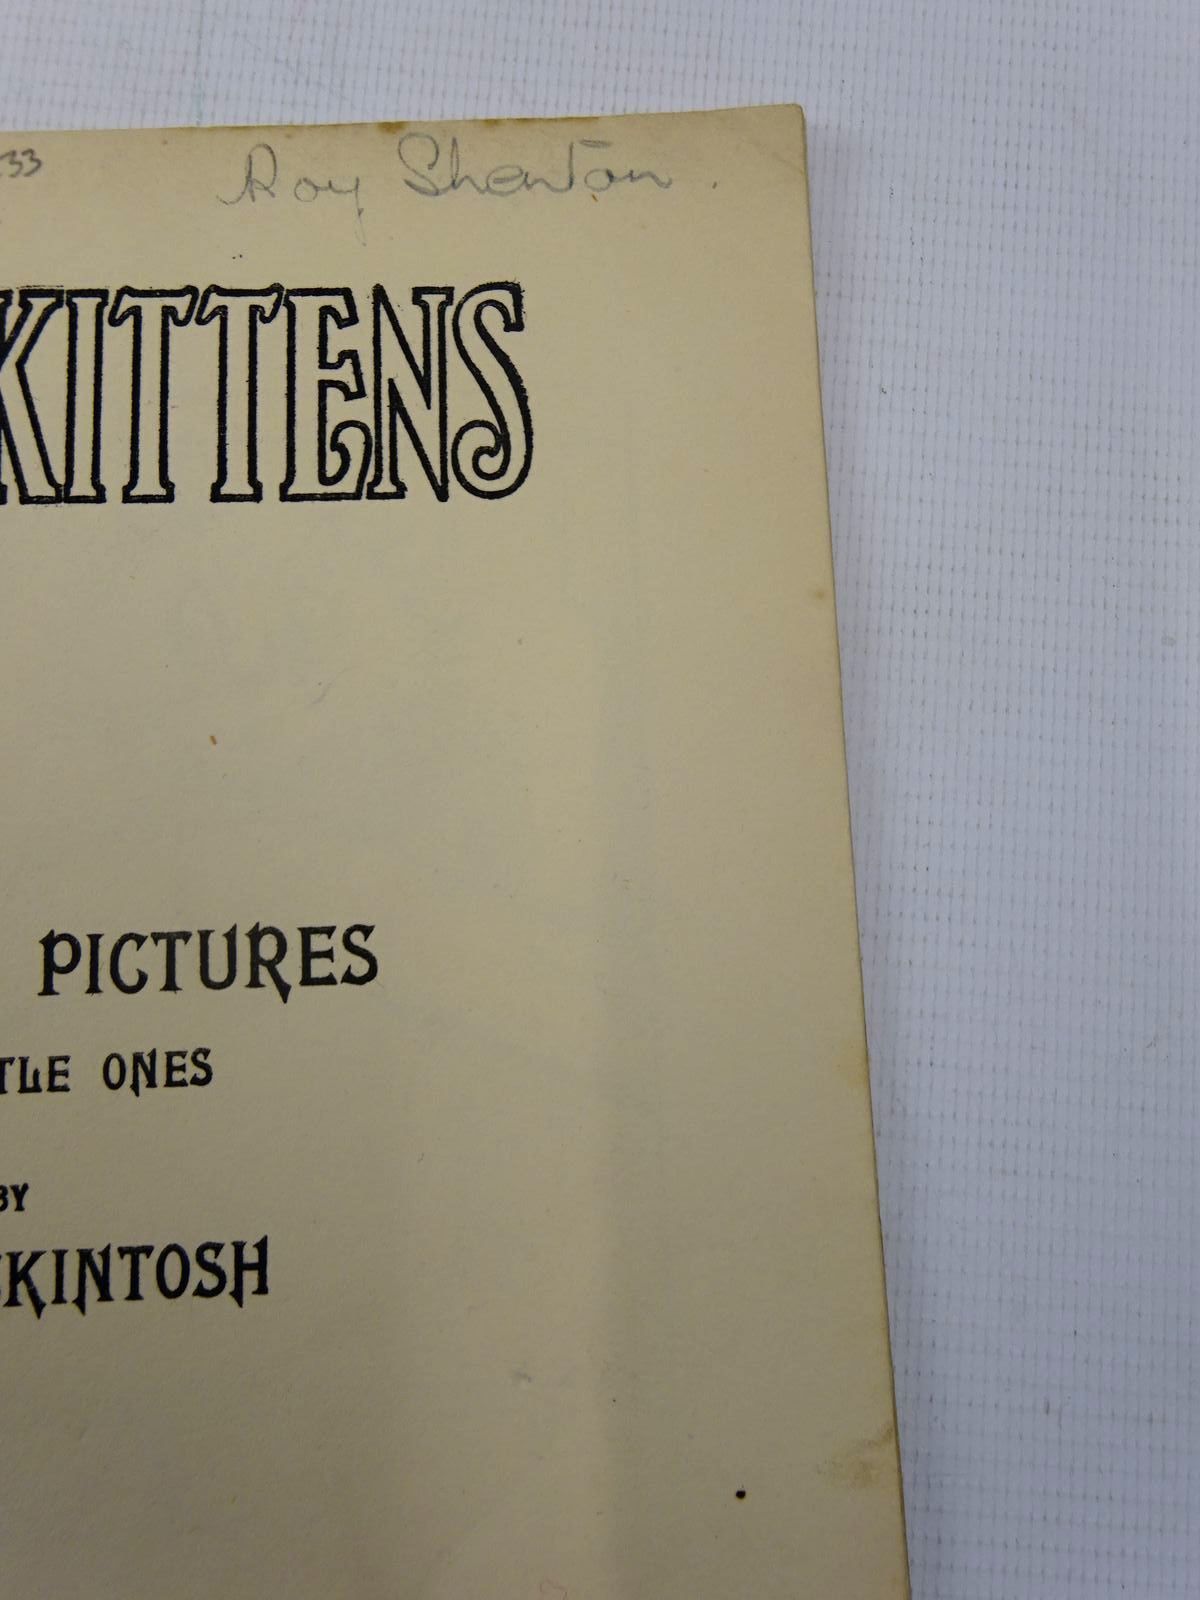 Photo of CATS AND KITTENS written by Mackintosh, Mabel illustrated by Wain, Louis published by John F. Shaw & Co Ltd. (STOCK CODE: 2128233)  for sale by Stella & Rose's Books